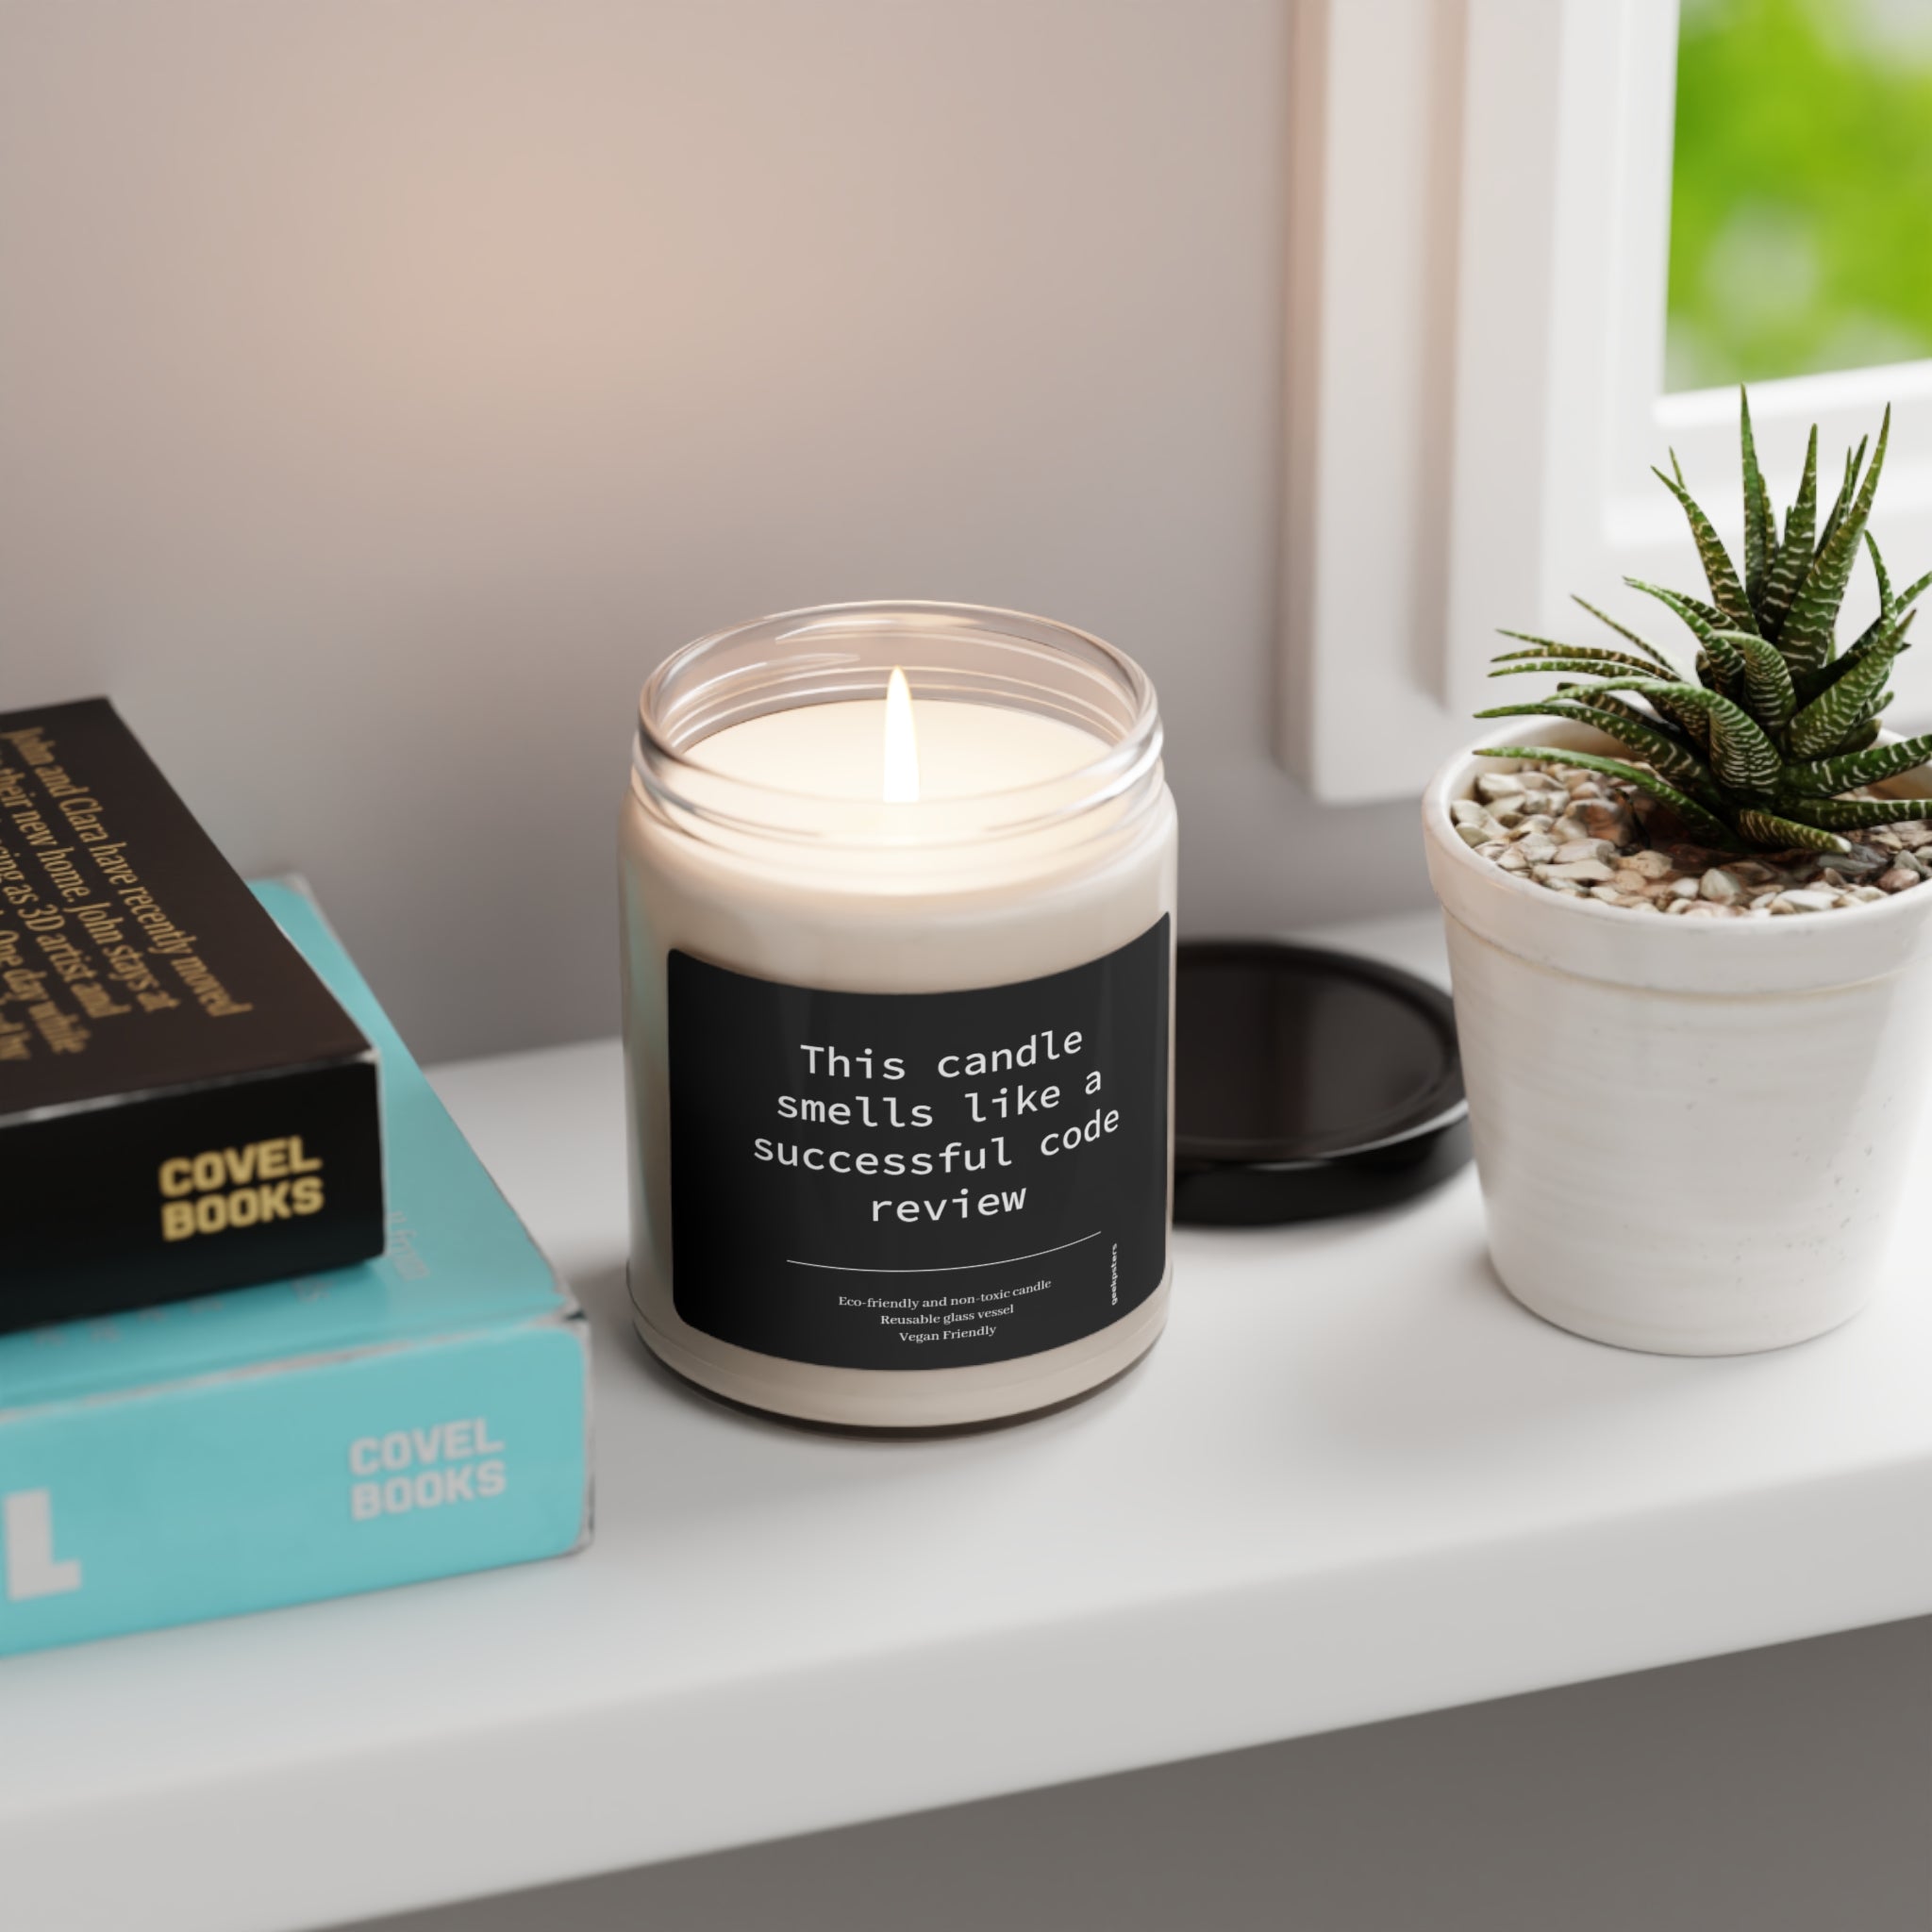 A This Candle Smells Like a Successful Code Review scented candle, with a natural soy wax blend, placed on a windowsill next to a stack of books and a potted succulent.